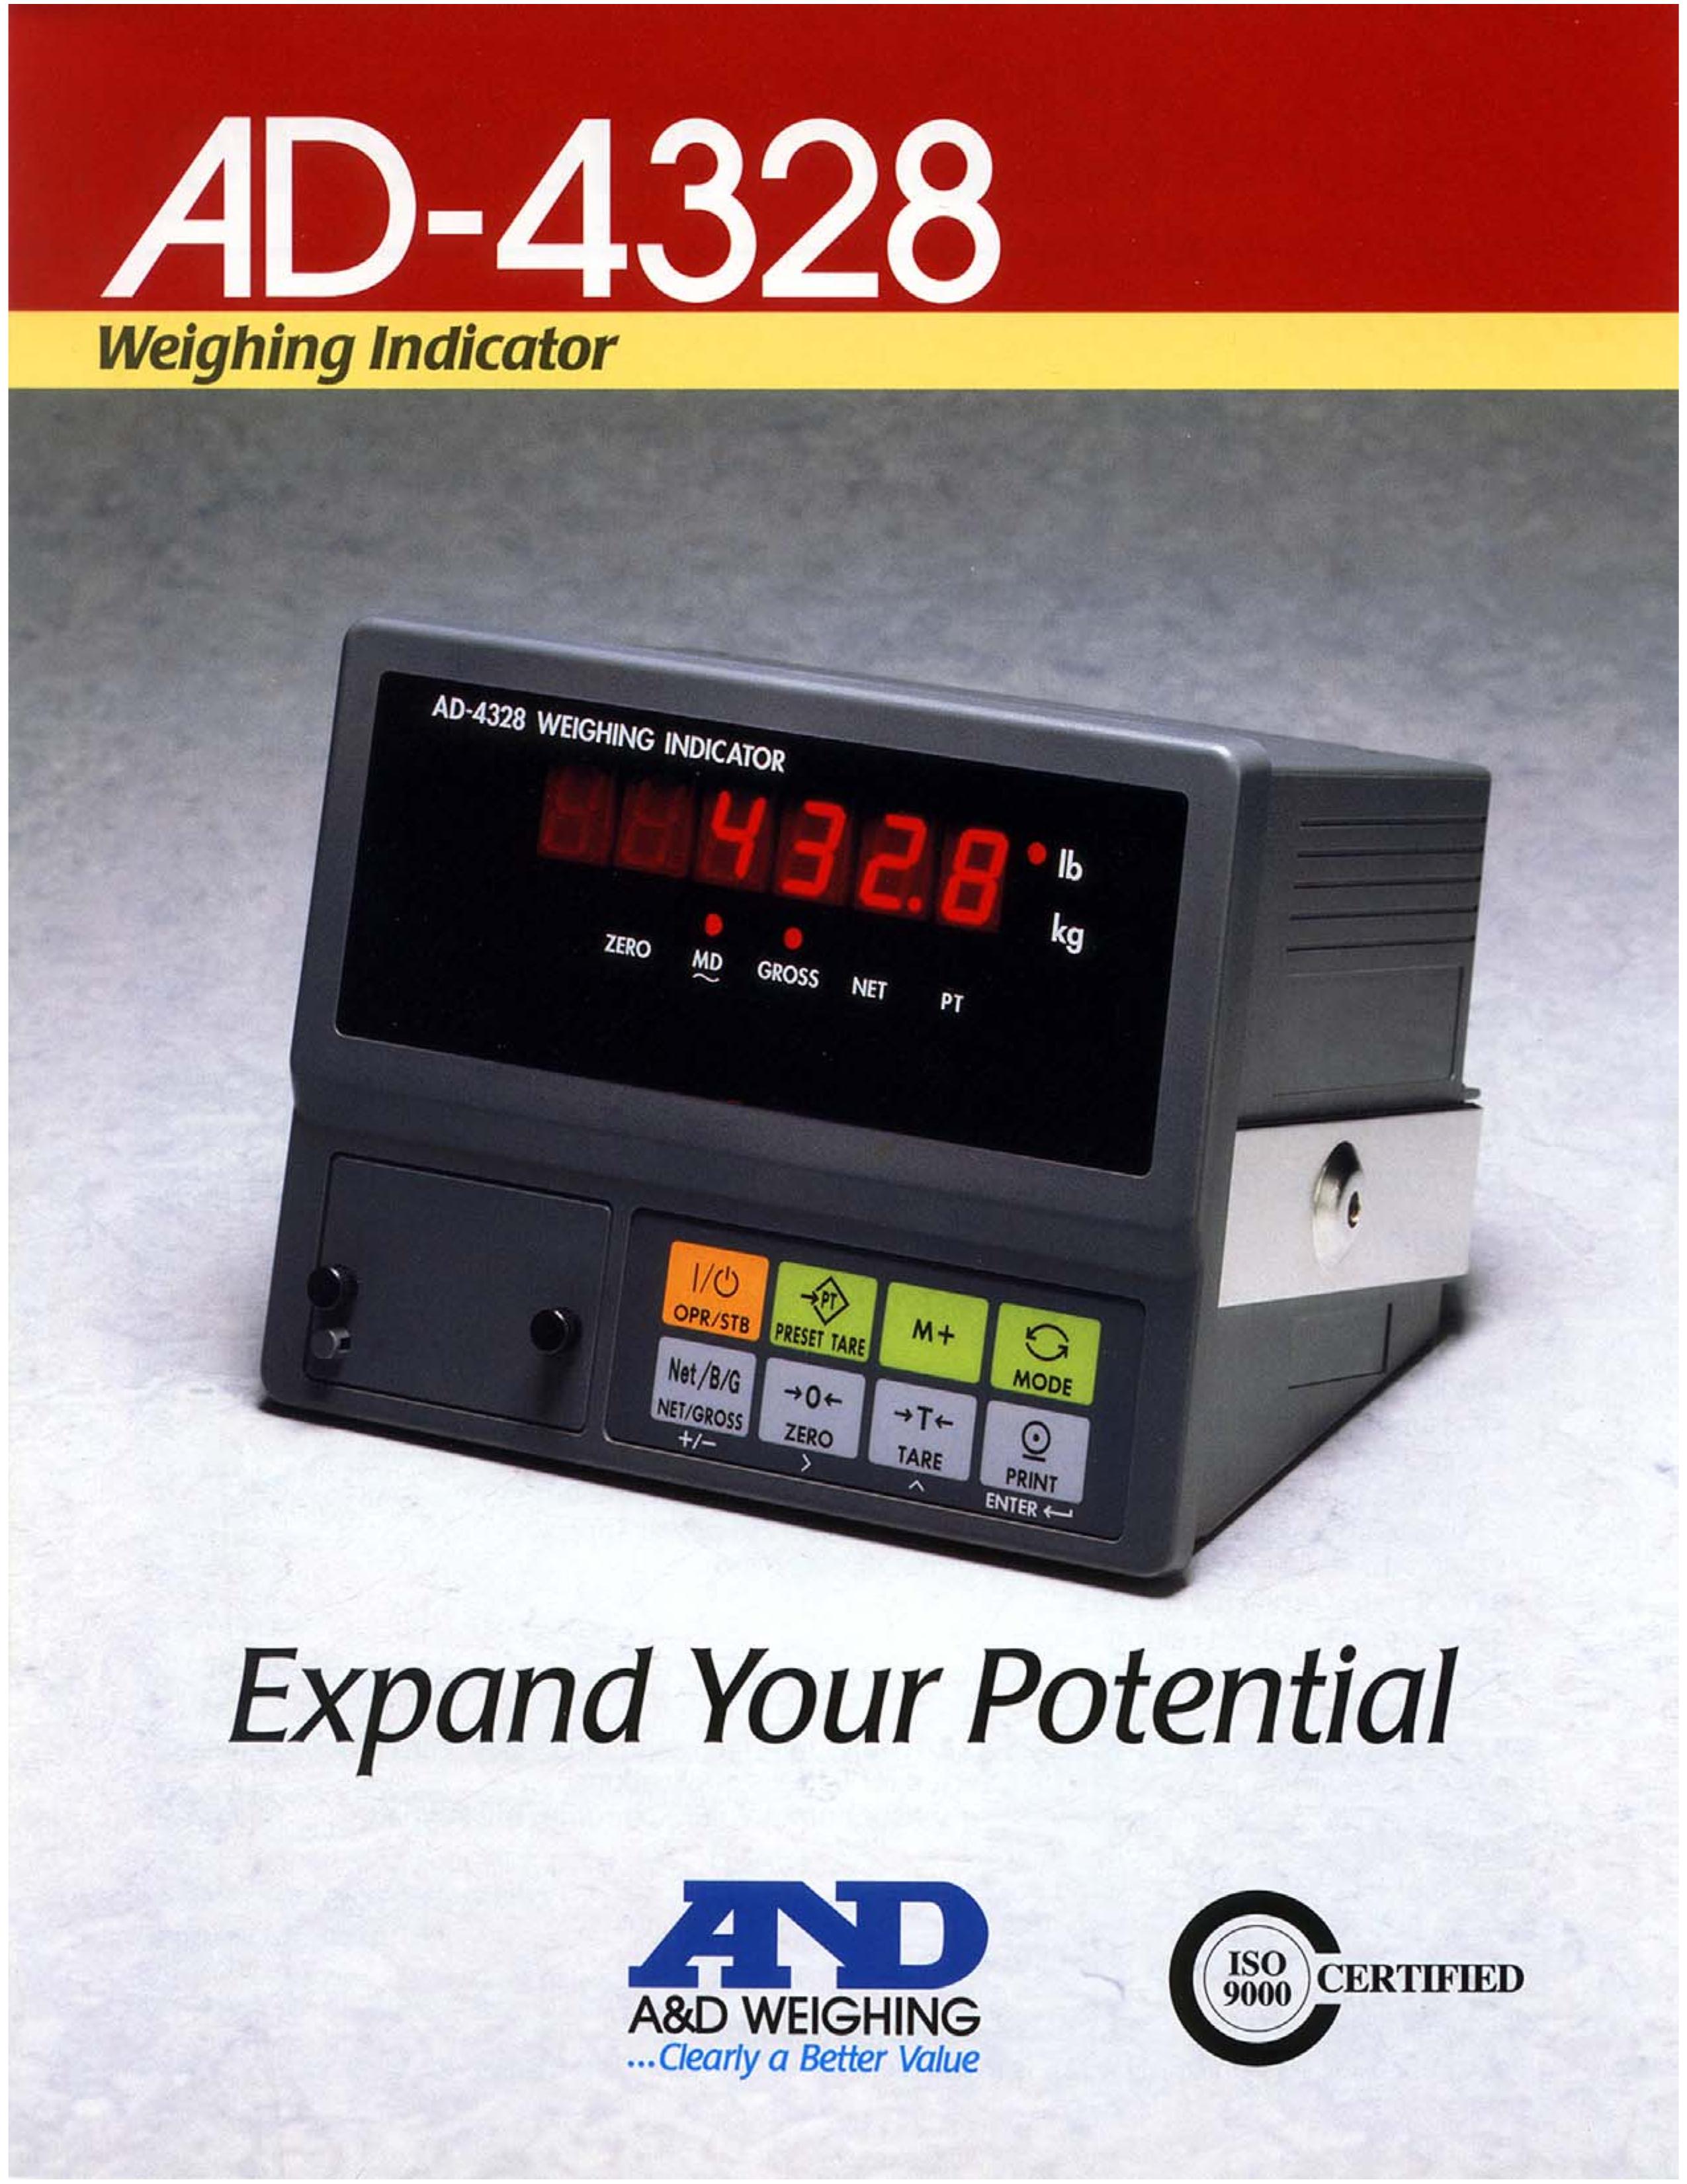 A&D AD-4328 Scale User Manual